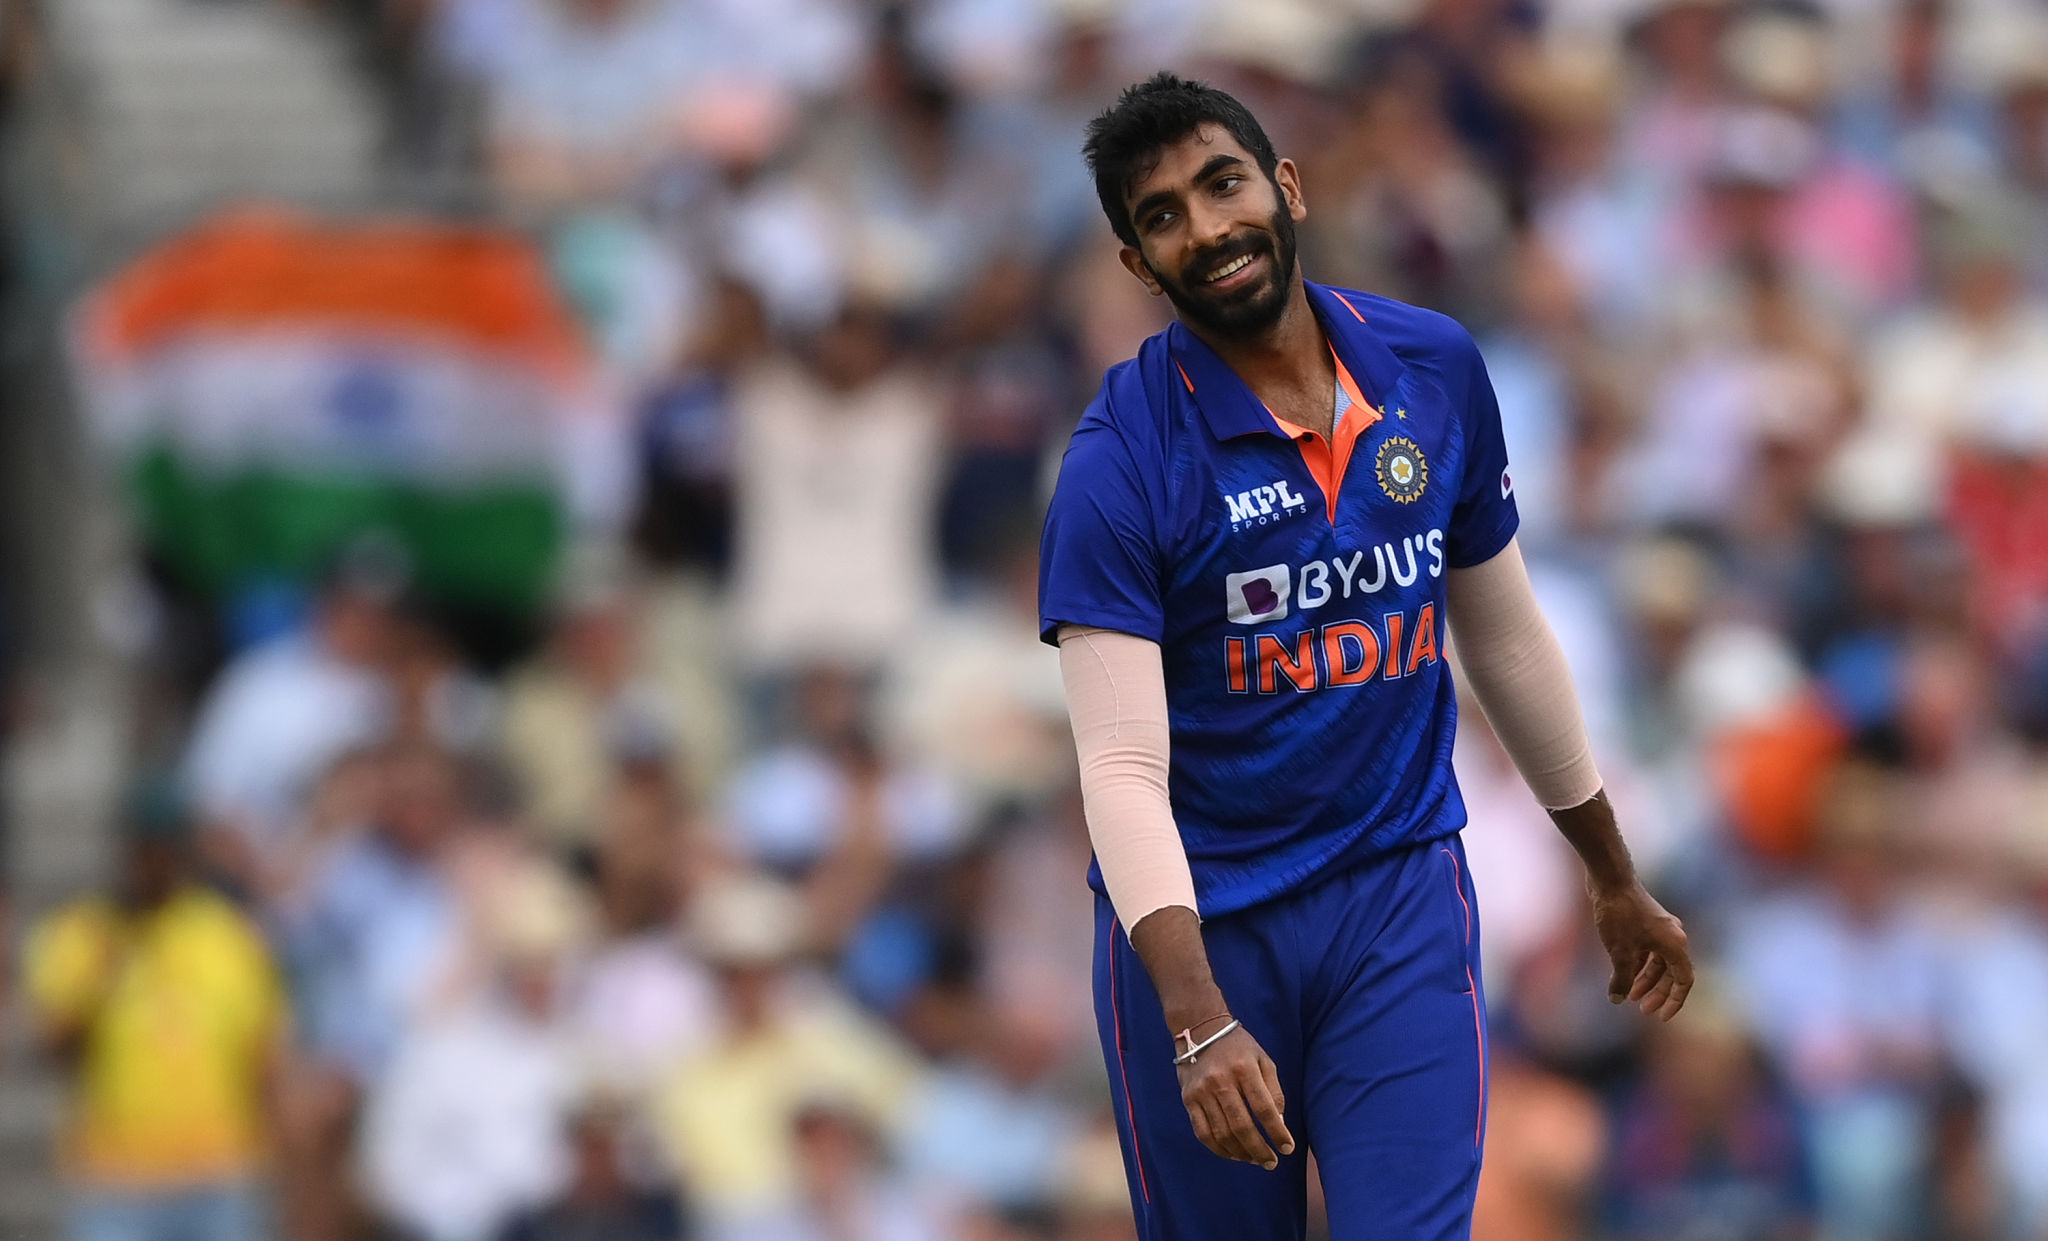 Asia Cup 2022: Ex-player Sanjay Bangar makes BIG STATEMENT ahead of India vs Pakistan clash, says ‘Jasprit Bumrah will not be missed in death overs’, CHECK WHY